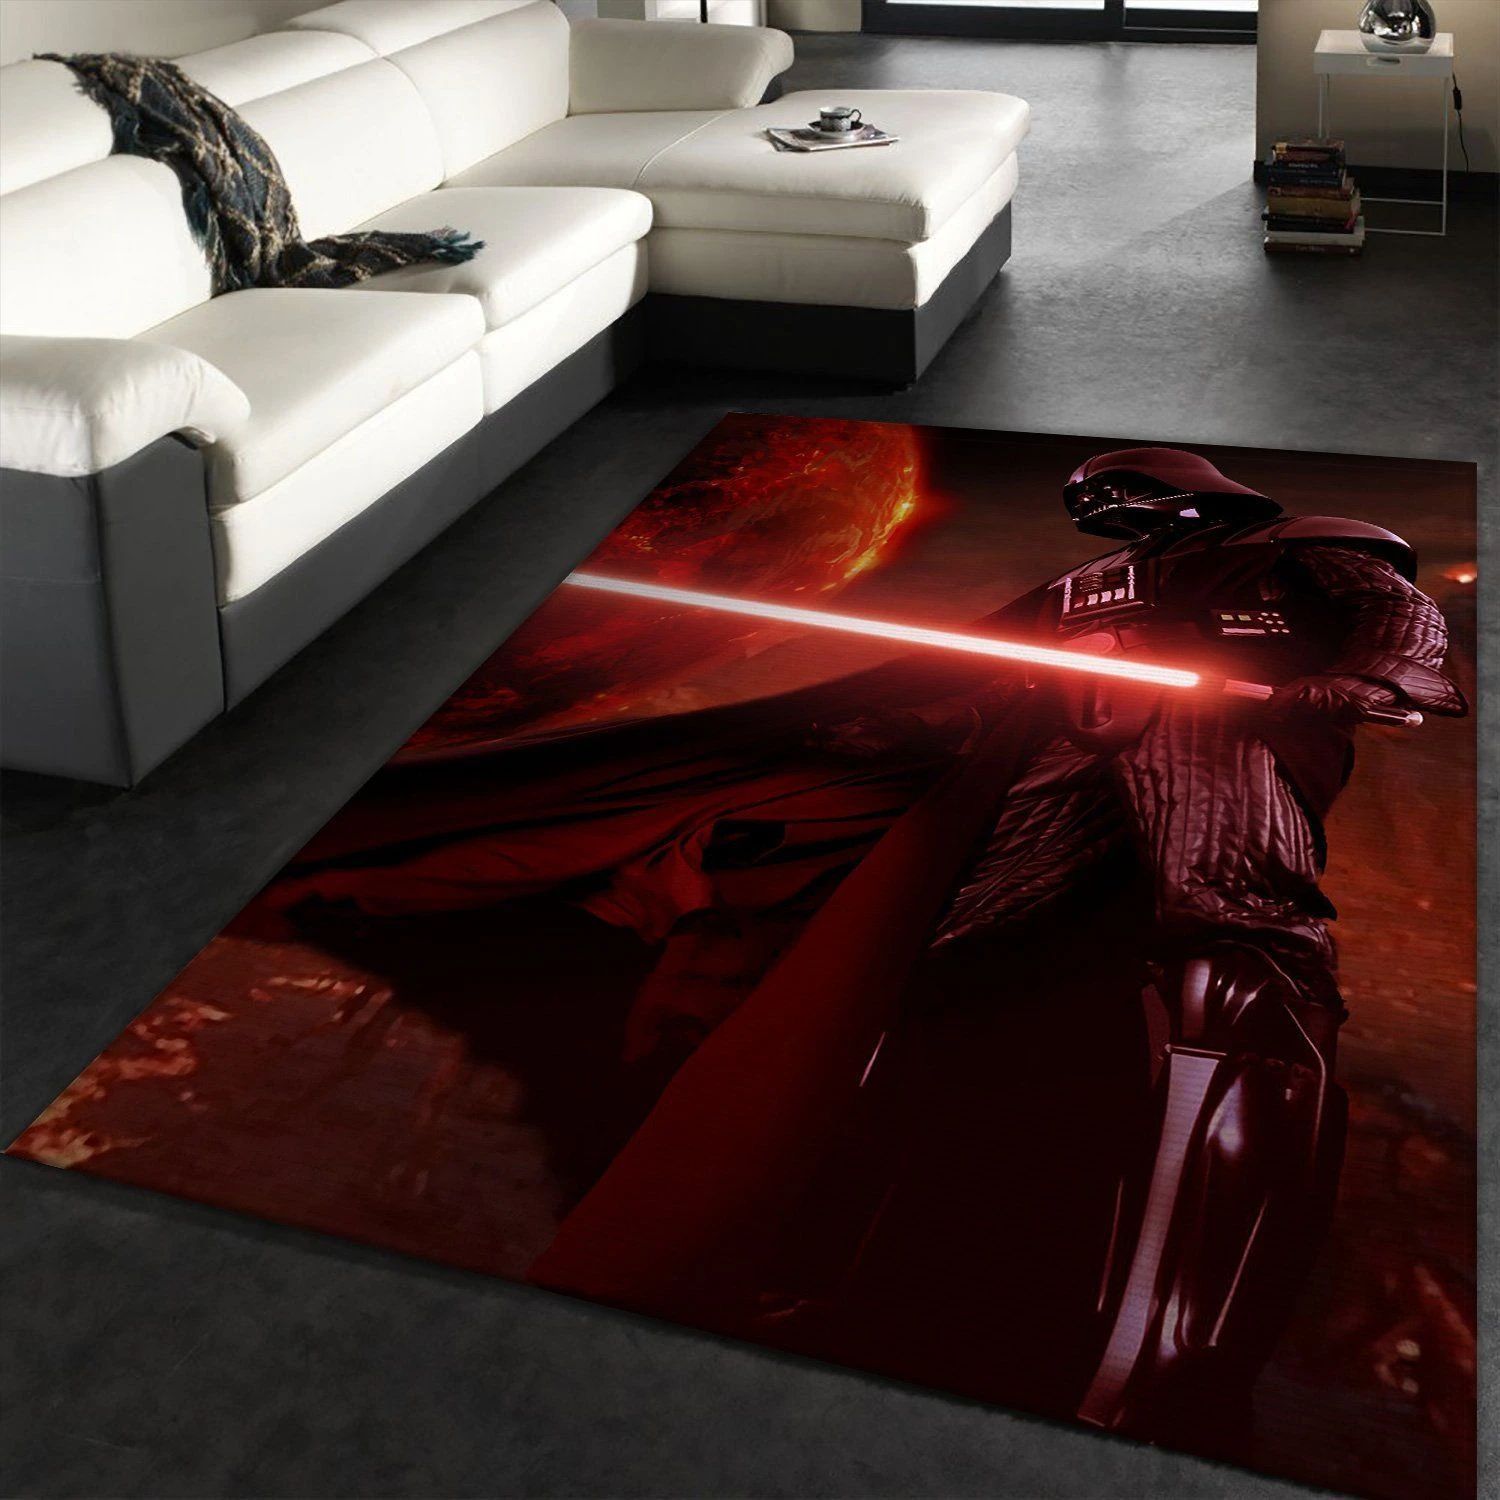 Darth Vader With Light Saber Star Wars Area Rugs Living Room Carpet Christmas Gift Floor Decor The US Decor - Indoor Outdoor Rugs